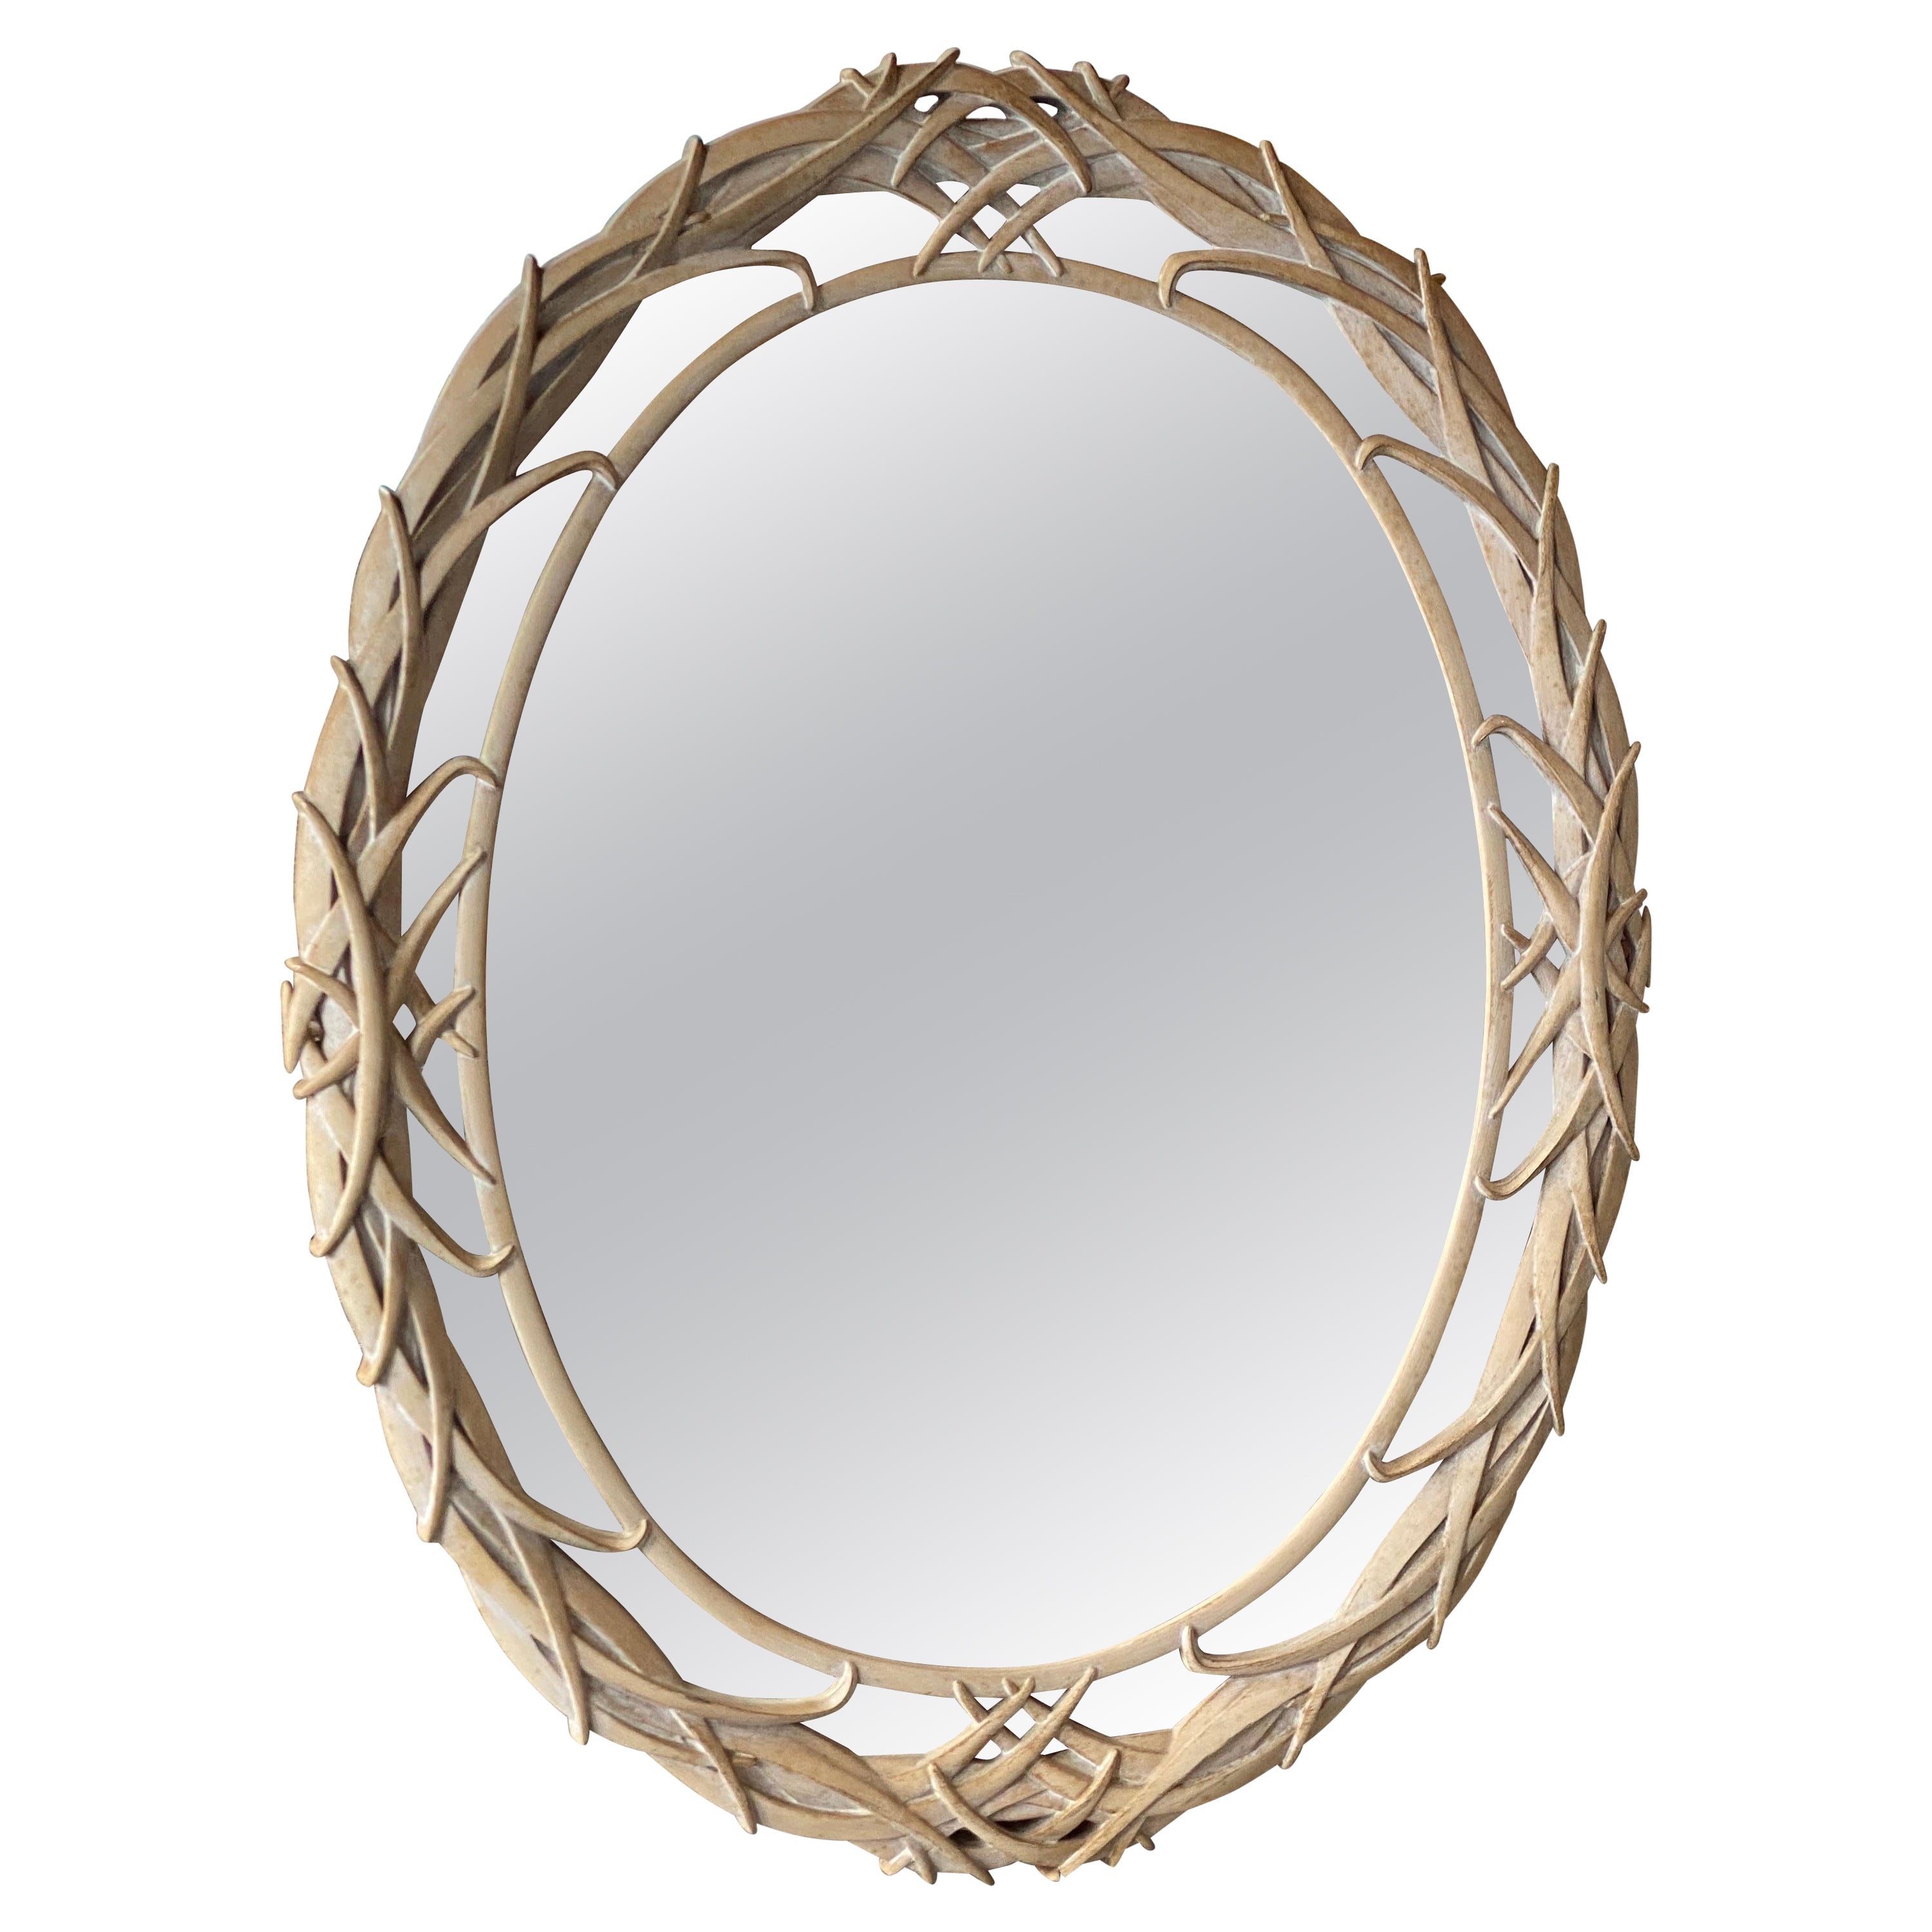 Vintage Oval Palm Frond Leaf Leaves Palm Beach Wall Mirror